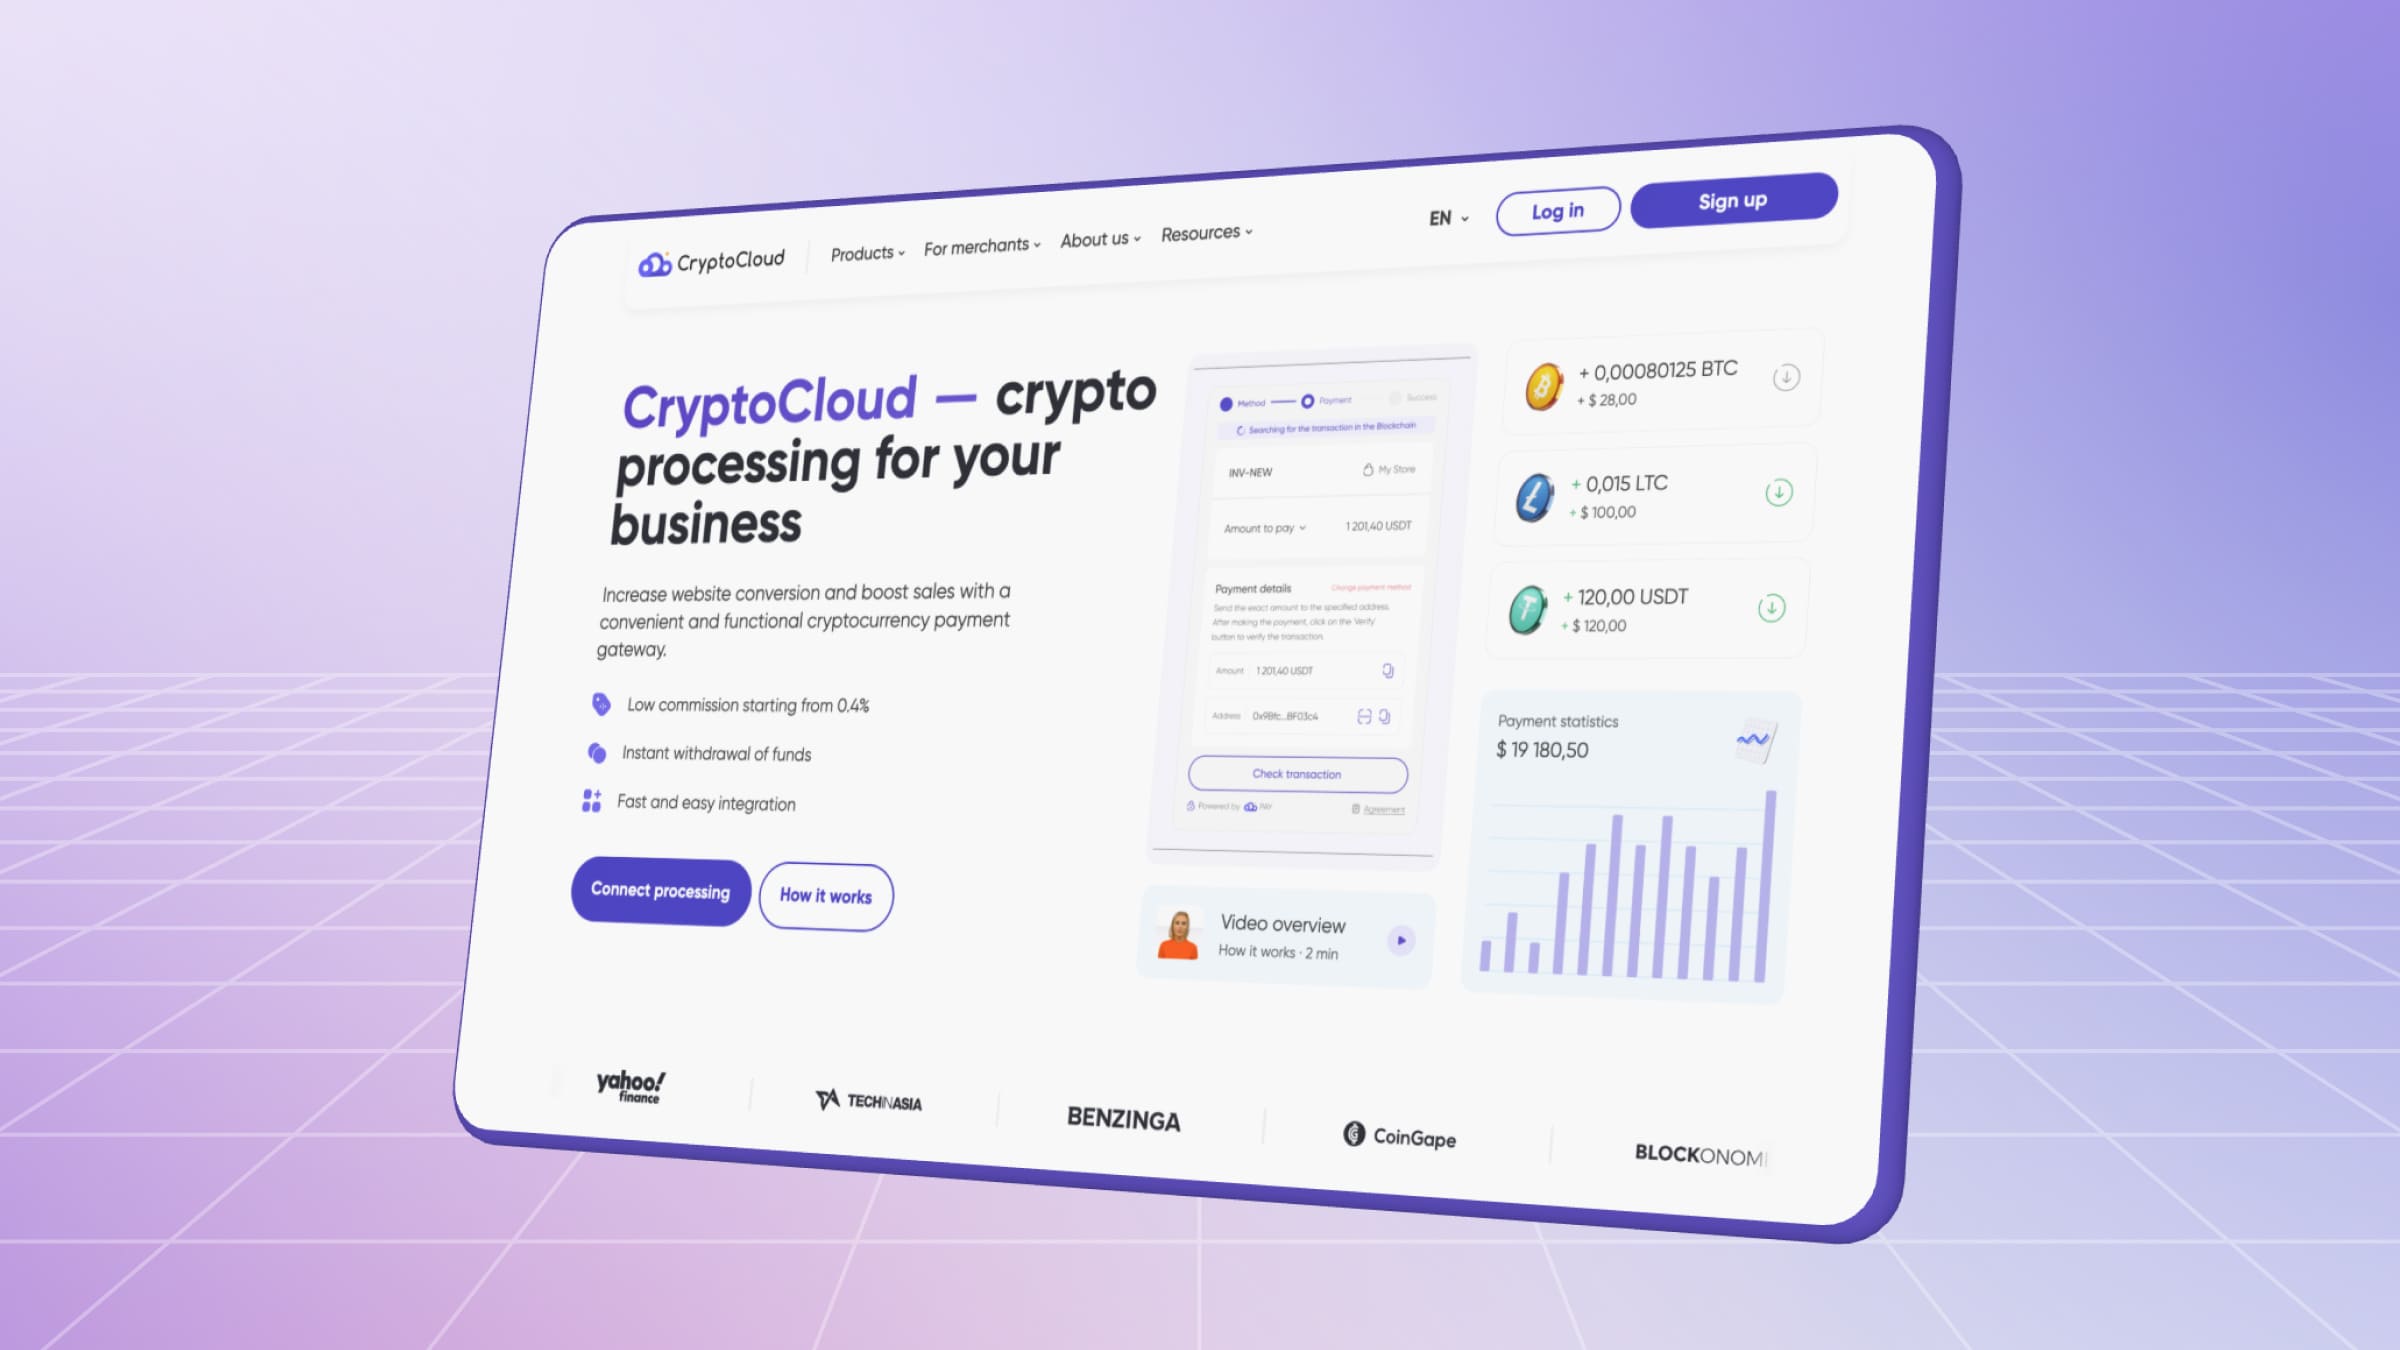 CryptoCloud integrates easily into the website and allows you to start accepting crypto payments.